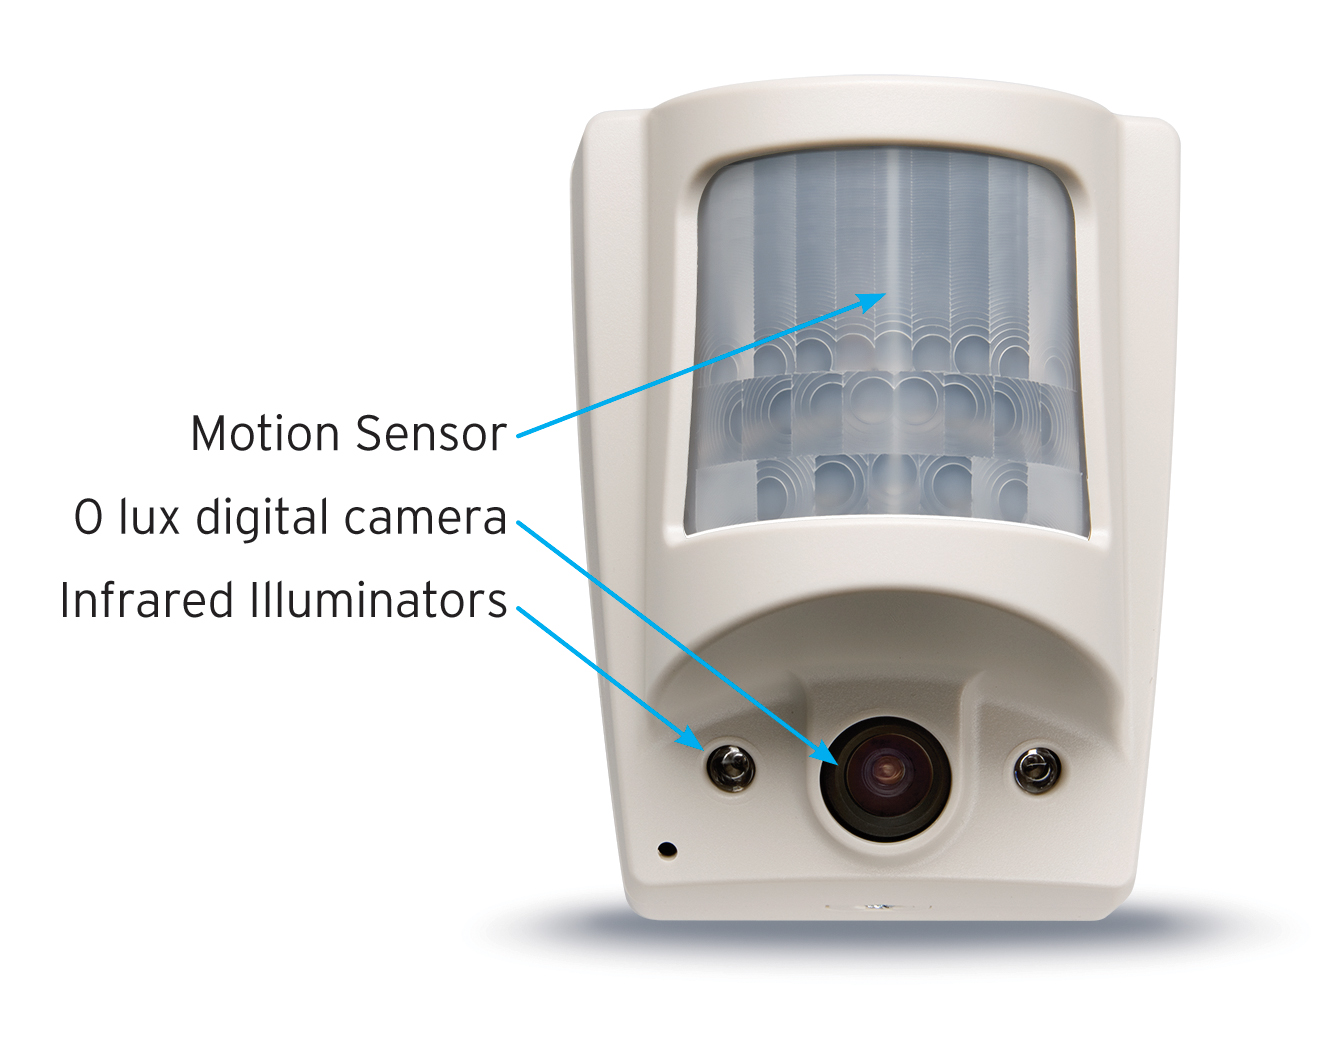  A white camera with a motion sensor and infrared illuminators for detecting tuyul.